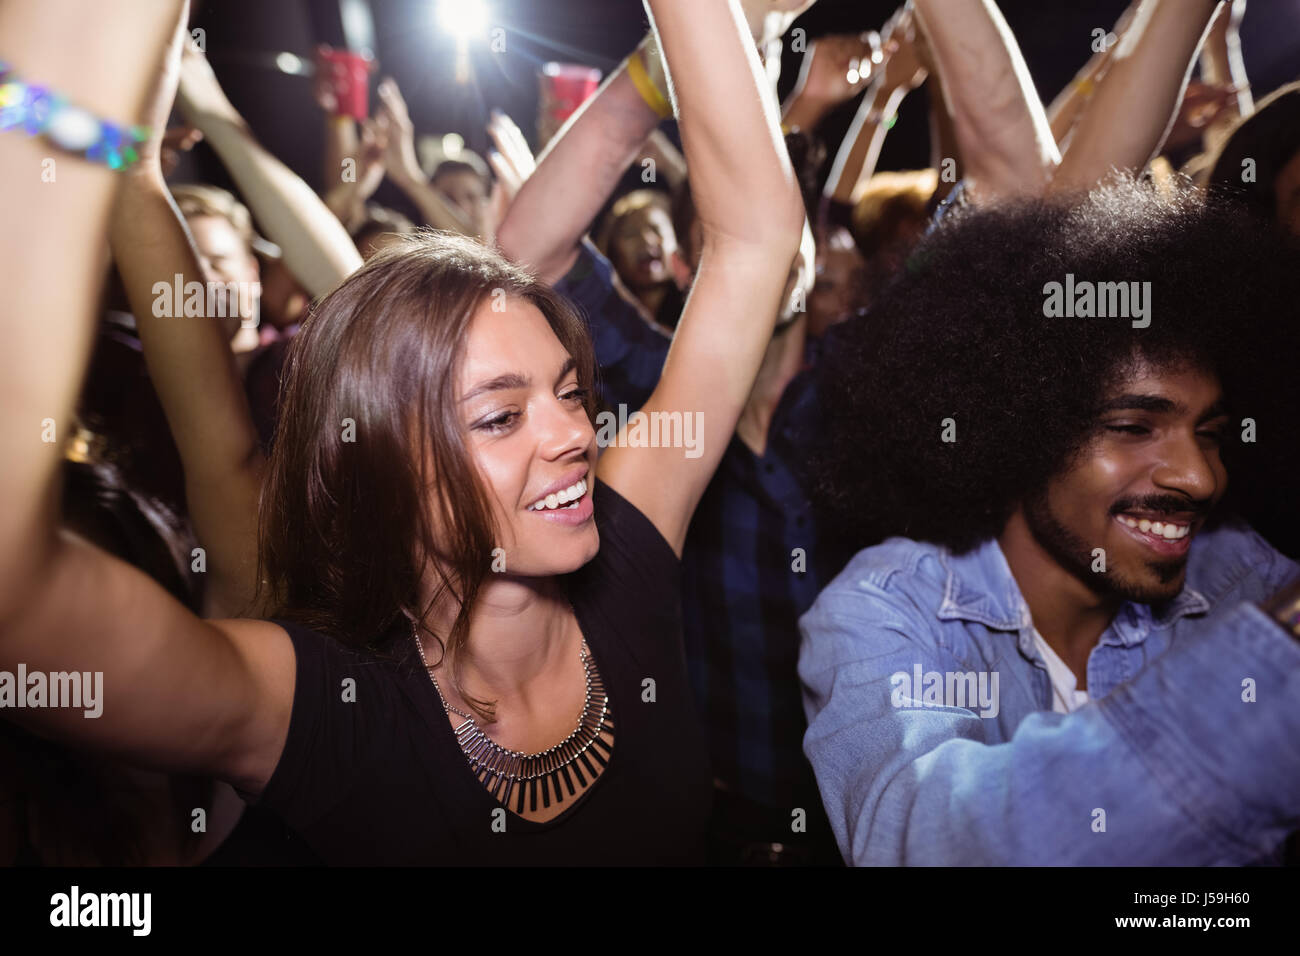 Friends dancing at nightclub during music festival Stock Photo